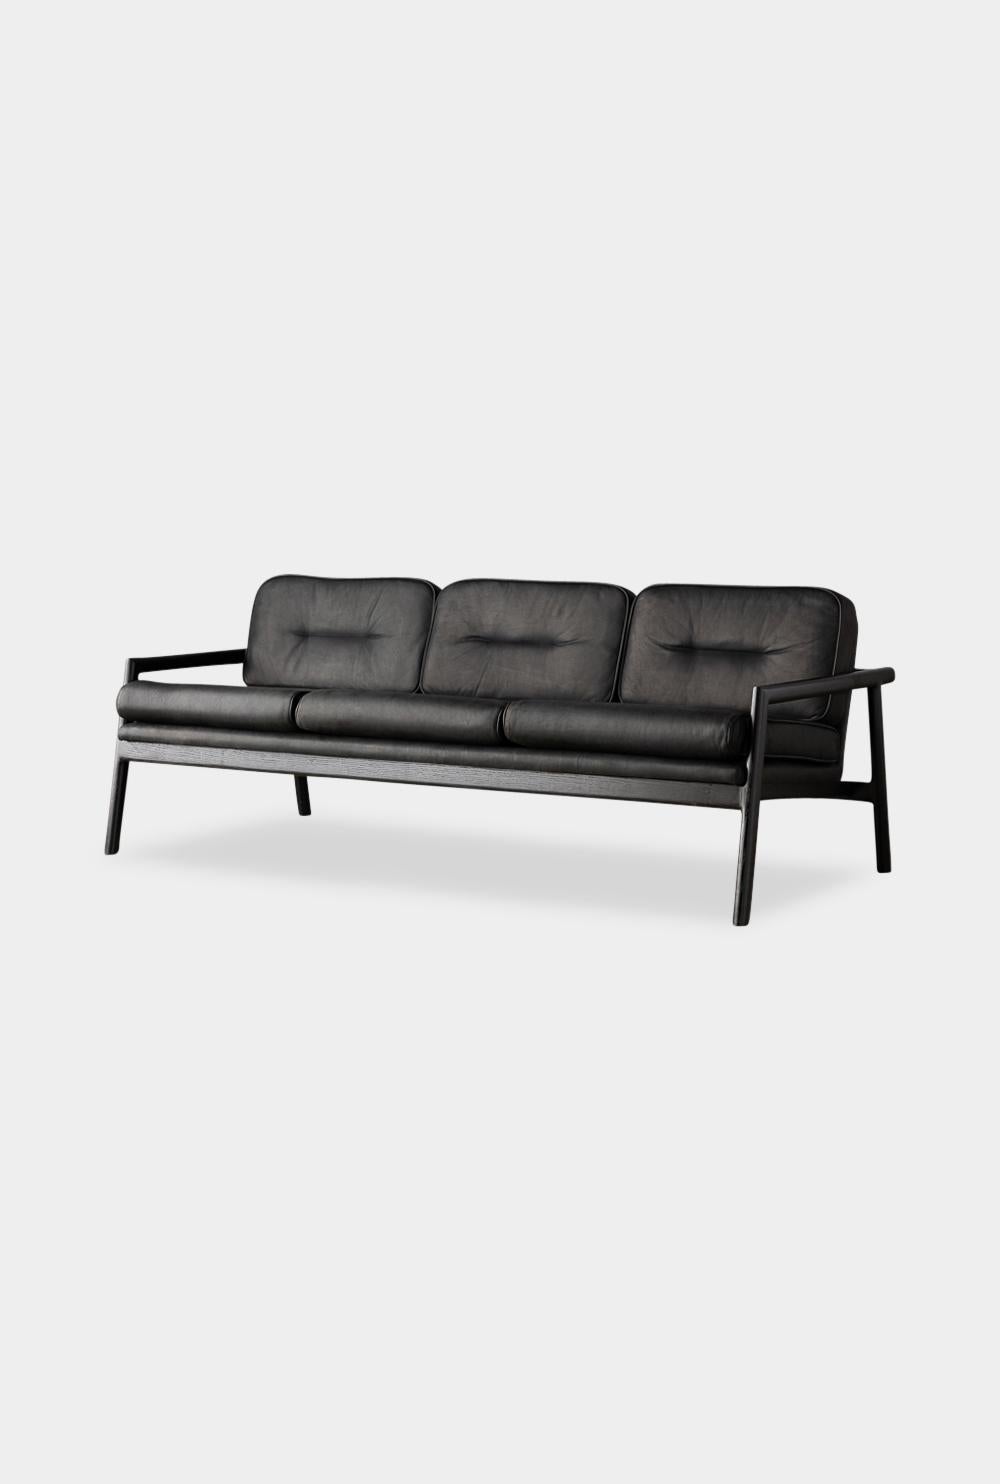 Mid-Century Modern Handcrafted Ebonized Oak Moresby Sofa with Custom Linen or Leather Upholstery For Sale